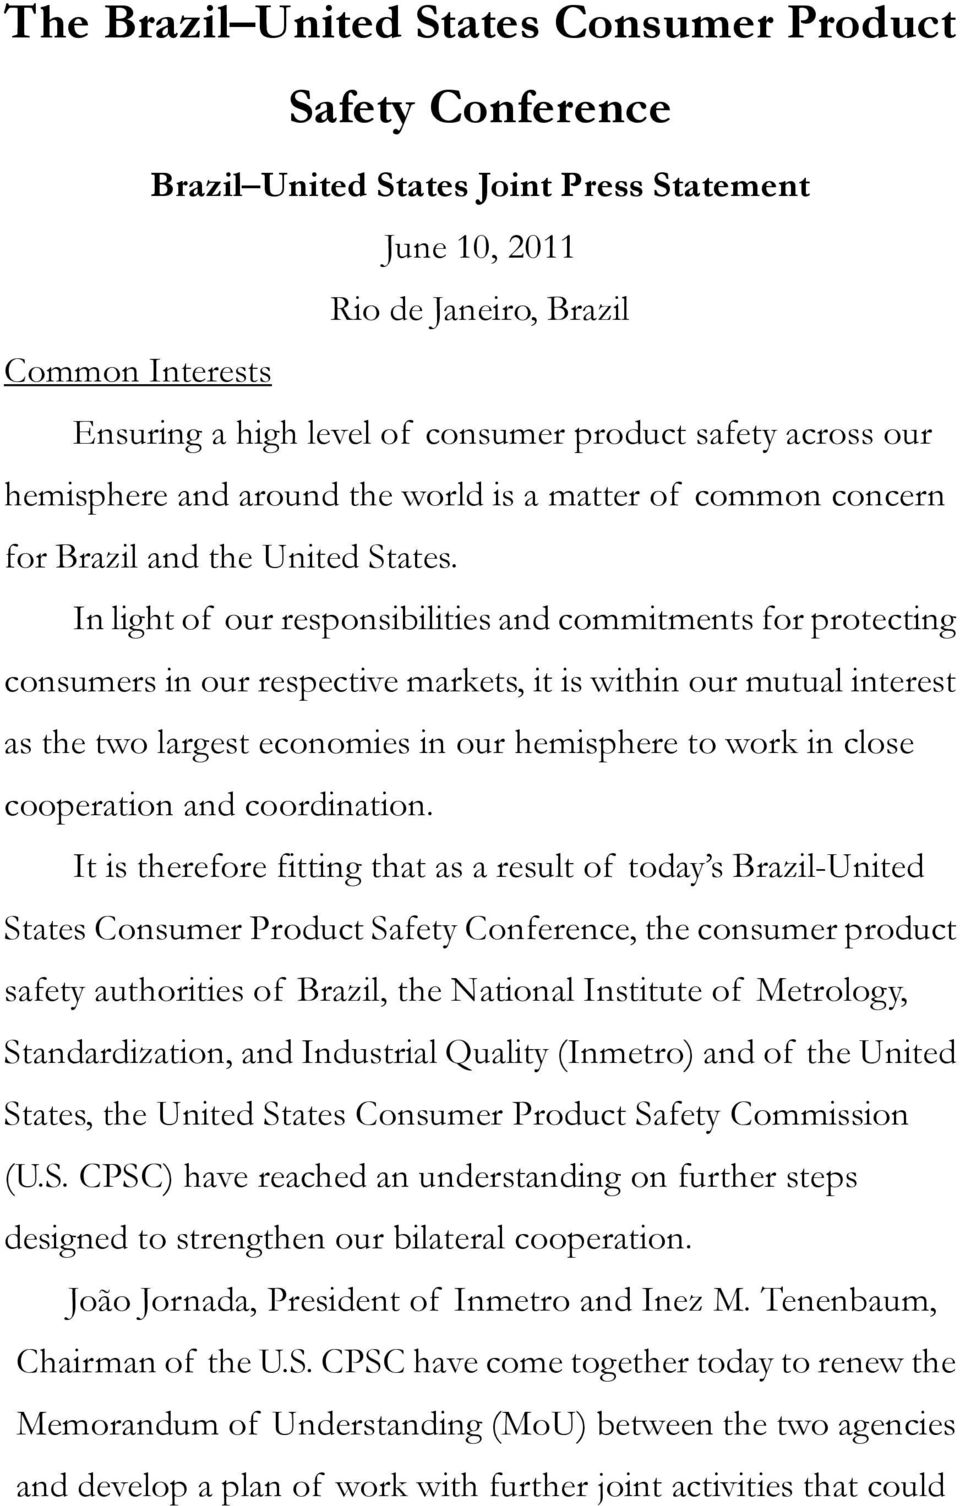 In light of our responsibilities and commitments for protecting consumers in our respective markets, it is within our mutual interest as the two largest economies in our hemisphere to work in close